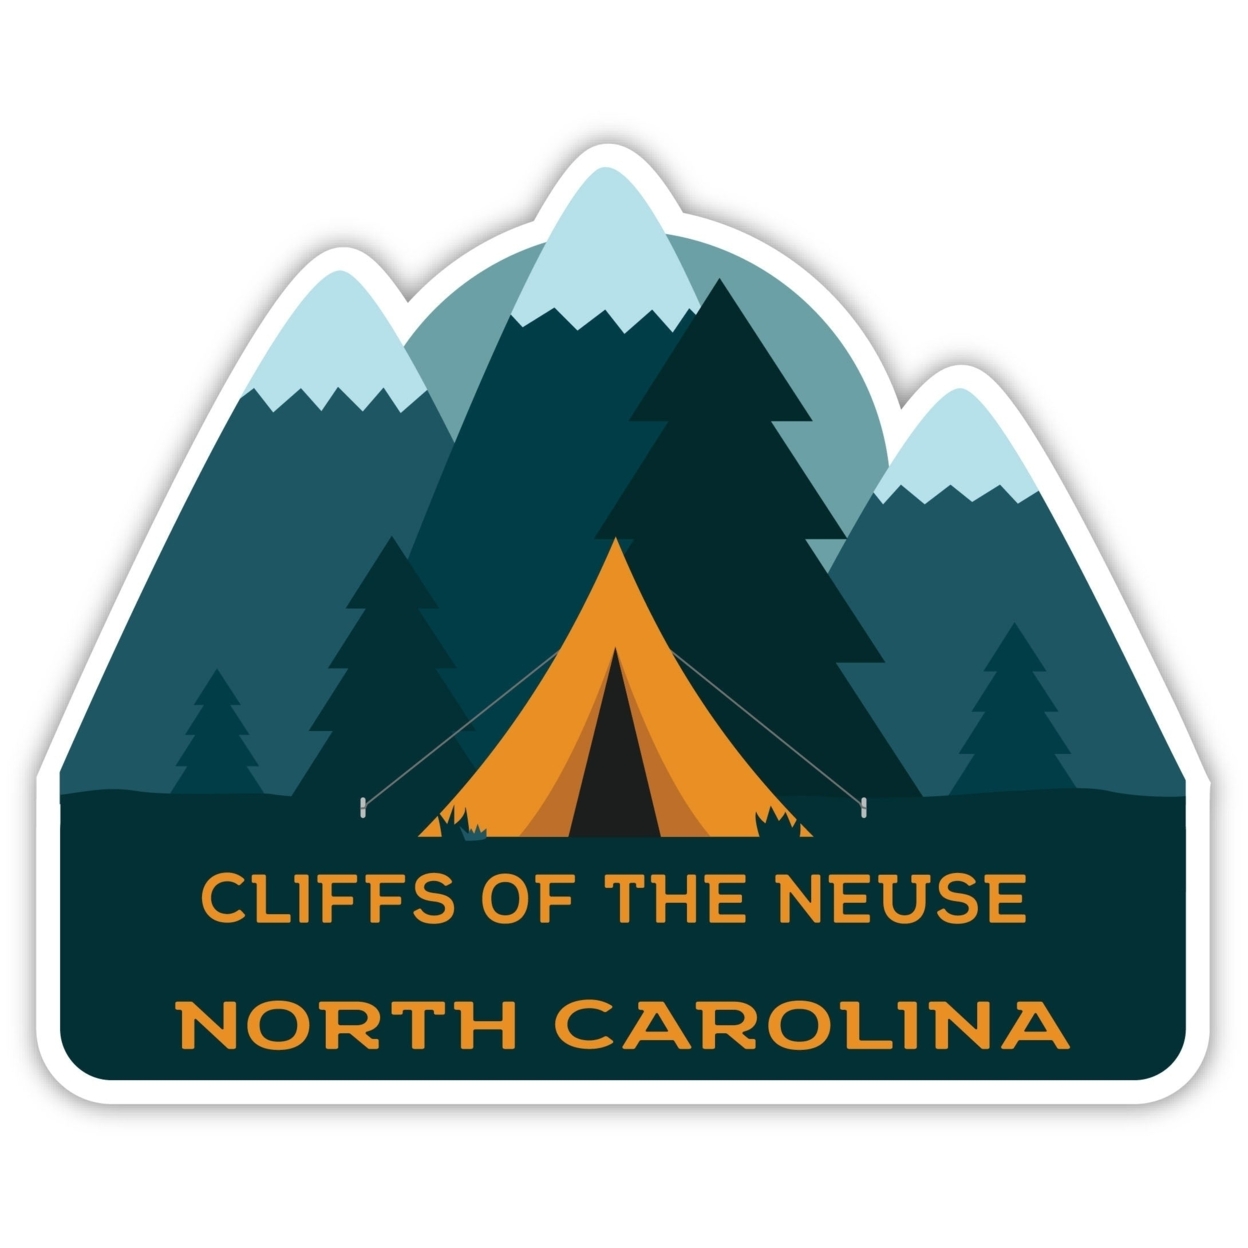 Cliffs Of The Neuse North Carolina Souvenir Decorative Stickers (Choose Theme And Size) - 4-Pack, 12-Inch, Tent